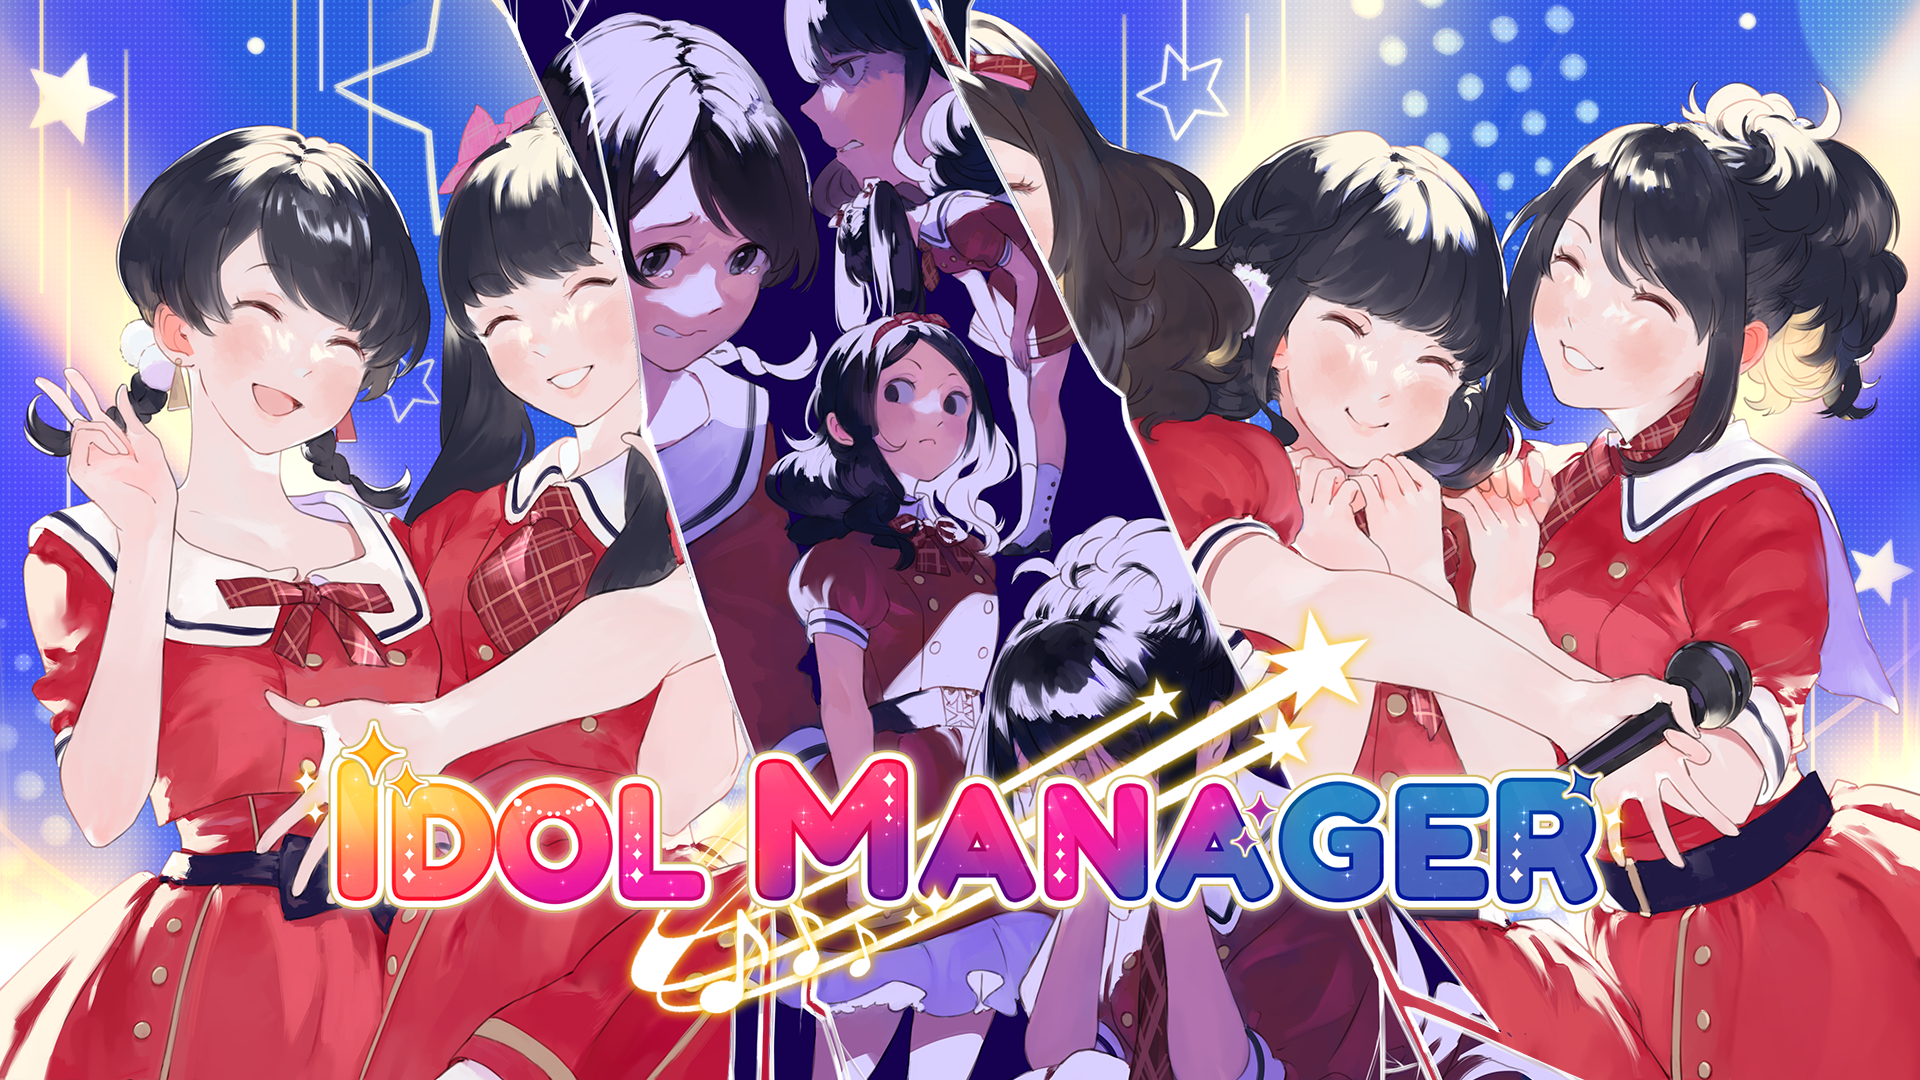 Idol Manager is releasing for Nintendo Switch/PlayStation®4/PlayStation®5 on August 25th!